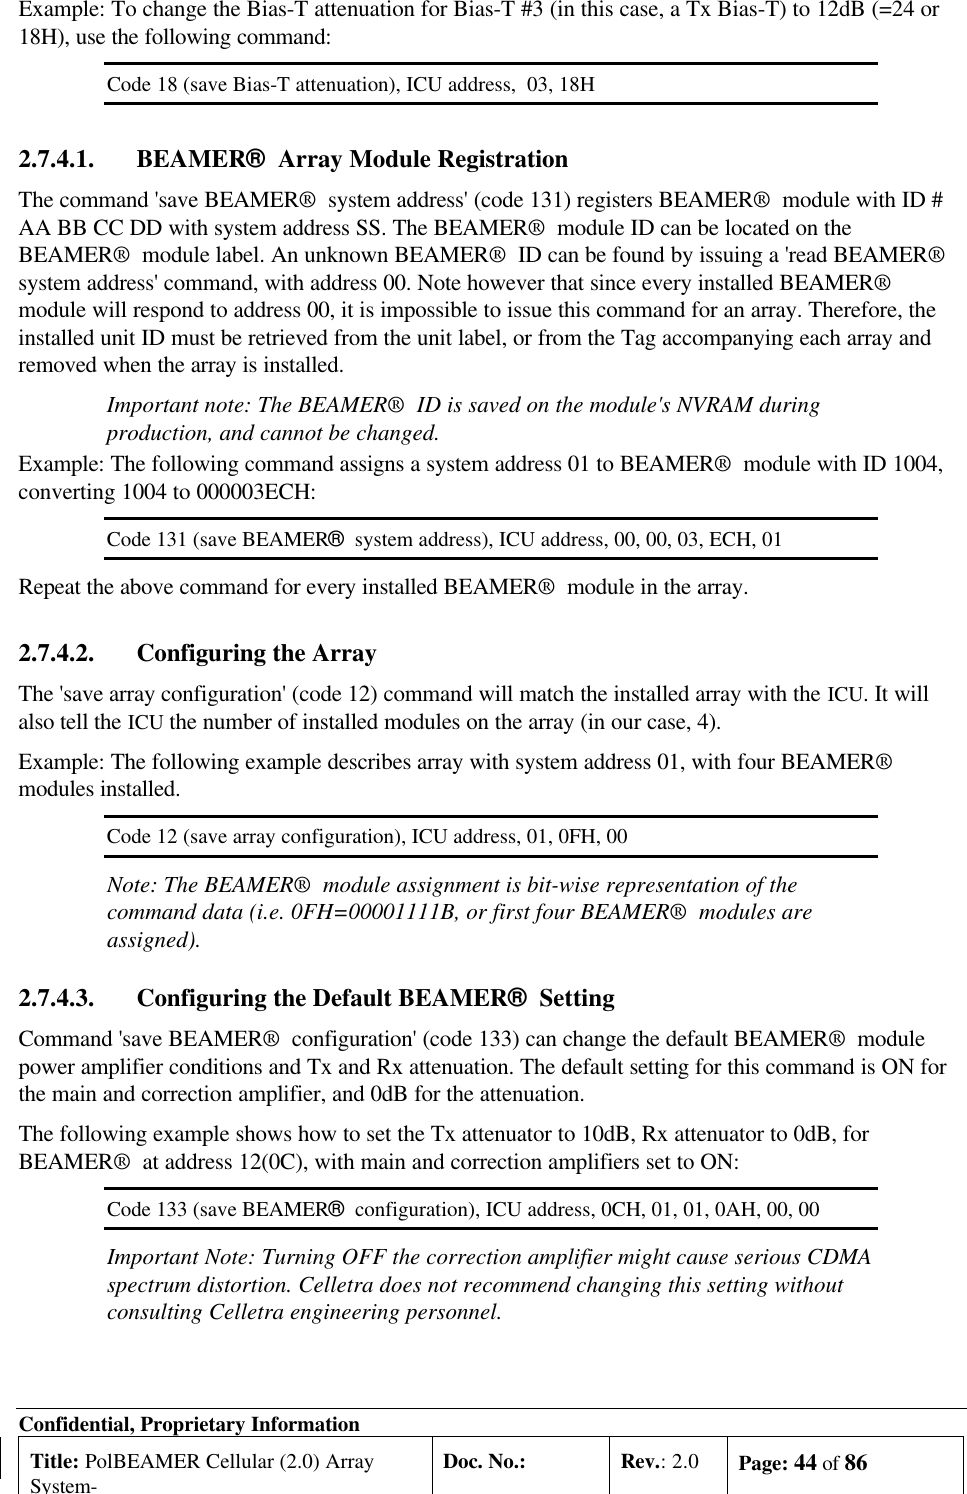 Confidential, Proprietary InformationTitle: PolBEAMER Cellular (2.0) ArraySystem-Doc. No.: Rev.: 2.0 Page: 44 of 86Example: To change the Bias-T attenuation for Bias-T #3 (in this case, a Tx Bias-T) to 12dB (=24 or18H), use the following command:Code 18 (save Bias-T attenuation), ICU address,  03, 18H2.7.4.1. BEAMER®  Array Module RegistrationThe command &apos;save BEAMER®  system address&apos; (code 131) registers BEAMER®  module with ID #AA BB CC DD with system address SS. The BEAMER®  module ID can be located on theBEAMER®  module label. An unknown BEAMER®  ID can be found by issuing a &apos;read BEAMER®system address&apos; command, with address 00. Note however that since every installed BEAMER®module will respond to address 00, it is impossible to issue this command for an array. Therefore, theinstalled unit ID must be retrieved from the unit label, or from the Tag accompanying each array andremoved when the array is installed.Important note: The BEAMER®  ID is saved on the module&apos;s NVRAM duringproduction, and cannot be changed.Example: The following command assigns a system address 01 to BEAMER®  module with ID 1004,converting 1004 to 000003ECH:Code 131 (save BEAMER®  system address), ICU address, 00, 00, 03, ECH, 01Repeat the above command for every installed BEAMER®  module in the array.2.7.4.2. Configuring the ArrayThe &apos;save array configuration&apos; (code 12) command will match the installed array with the ICU. It willalso tell the ICU the number of installed modules on the array (in our case, 4).Example: The following example describes array with system address 01, with four BEAMER®modules installed.Code 12 (save array configuration), ICU address, 01, 0FH, 00Note: The BEAMER®  module assignment is bit-wise representation of thecommand data (i.e. 0FH=00001111B, or first four BEAMER®  modules areassigned).2.7.4.3. Configuring the Default BEAMER®  SettingCommand &apos;save BEAMER®  configuration&apos; (code 133) can change the default BEAMER®  modulepower amplifier conditions and Tx and Rx attenuation. The default setting for this command is ON forthe main and correction amplifier, and 0dB for the attenuation.The following example shows how to set the Tx attenuator to 10dB, Rx attenuator to 0dB, forBEAMER®  at address 12(0C), with main and correction amplifiers set to ON:Code 133 (save BEAMER®  configuration), ICU address, 0CH, 01, 01, 0AH, 00, 00Important Note: Turning OFF the correction amplifier might cause serious CDMAspectrum distortion. Celletra does not recommend changing this setting withoutconsulting Celletra engineering personnel.